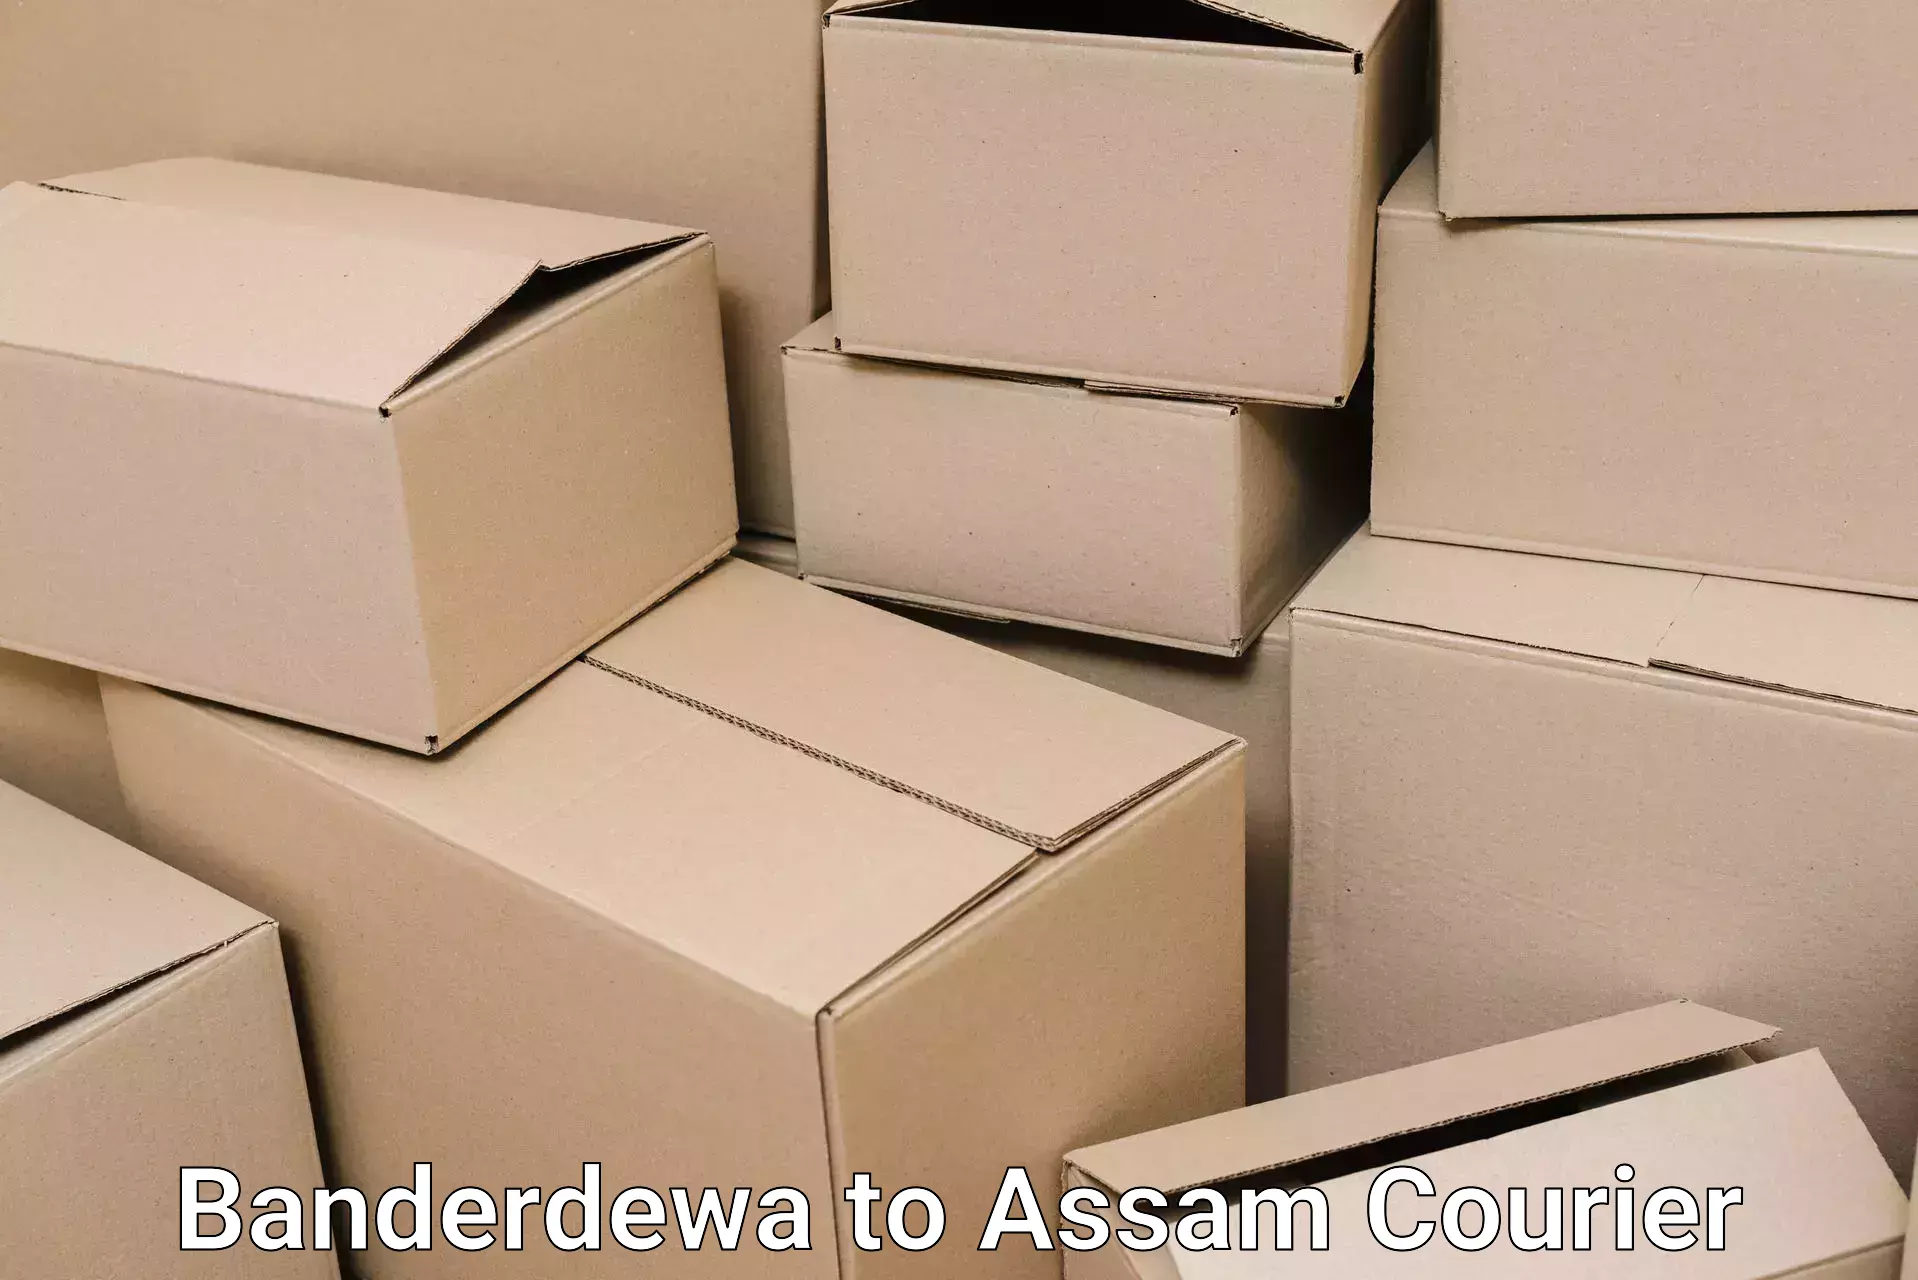 Furniture relocation services Banderdewa to Lala Assam